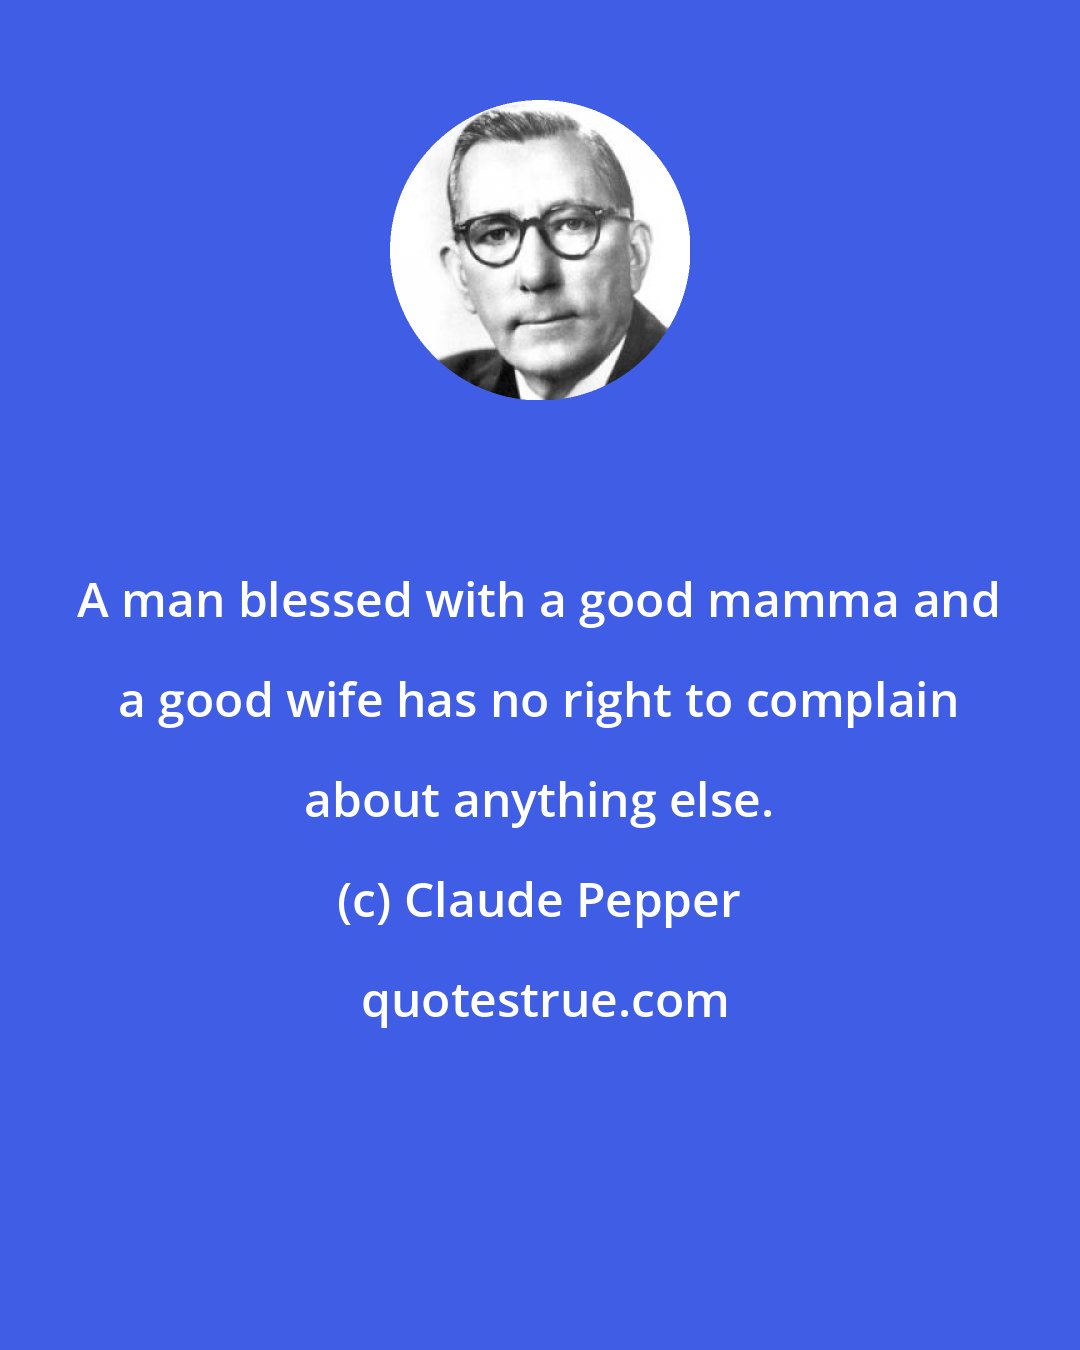 Claude Pepper: A man blessed with a good mamma and a good wife has no right to complain about anything else.